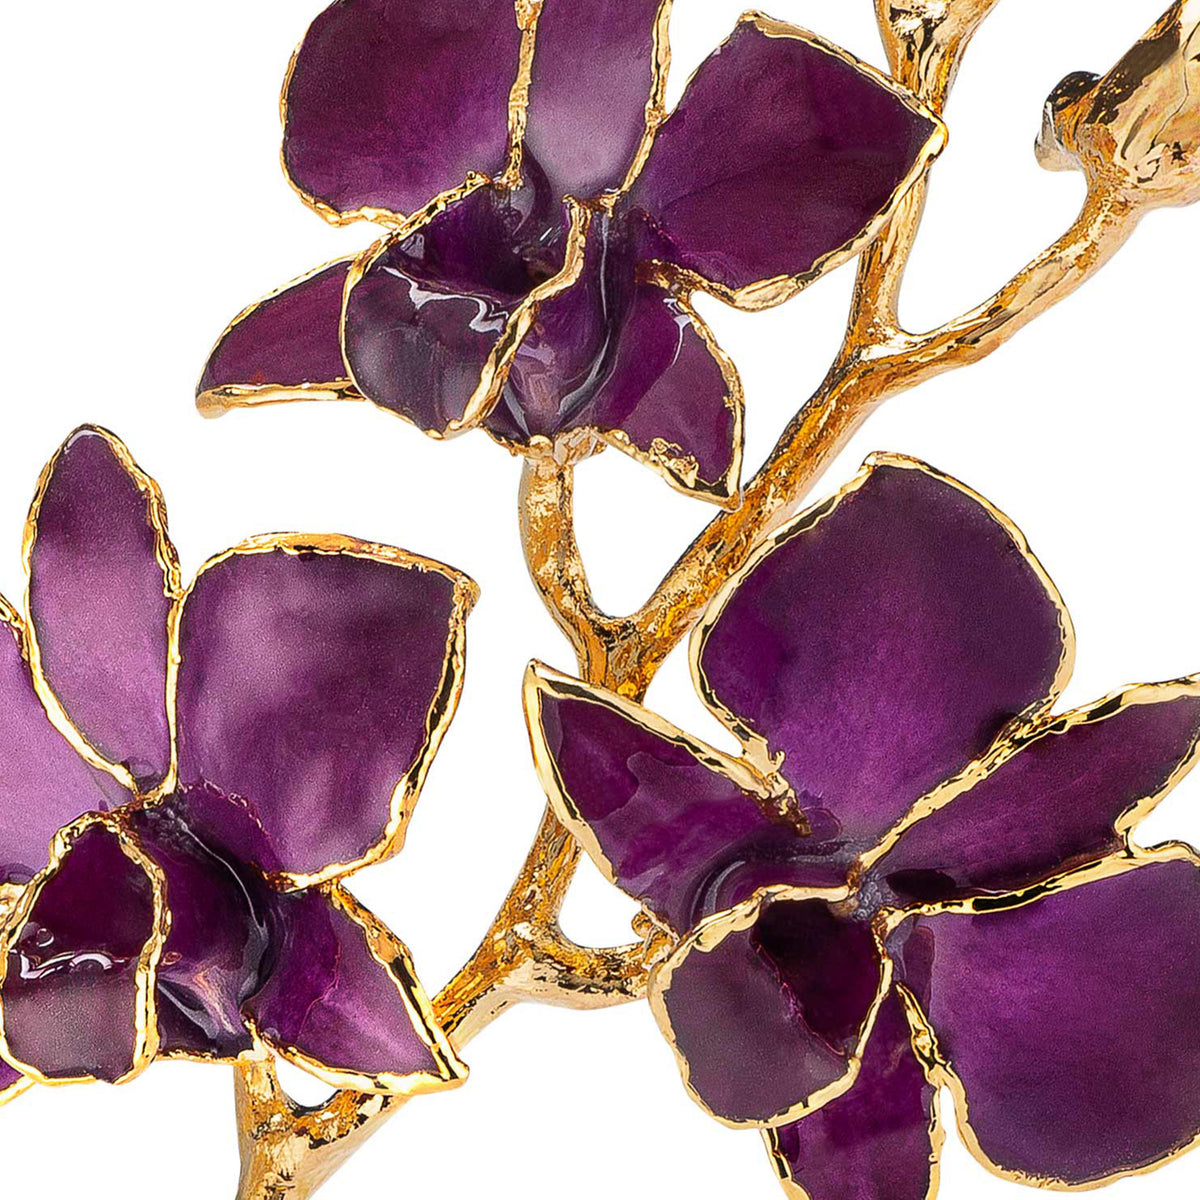 24K Gold Dipped Orchid in Purple view of gold stem and flowers closeup view showing detail of flowers